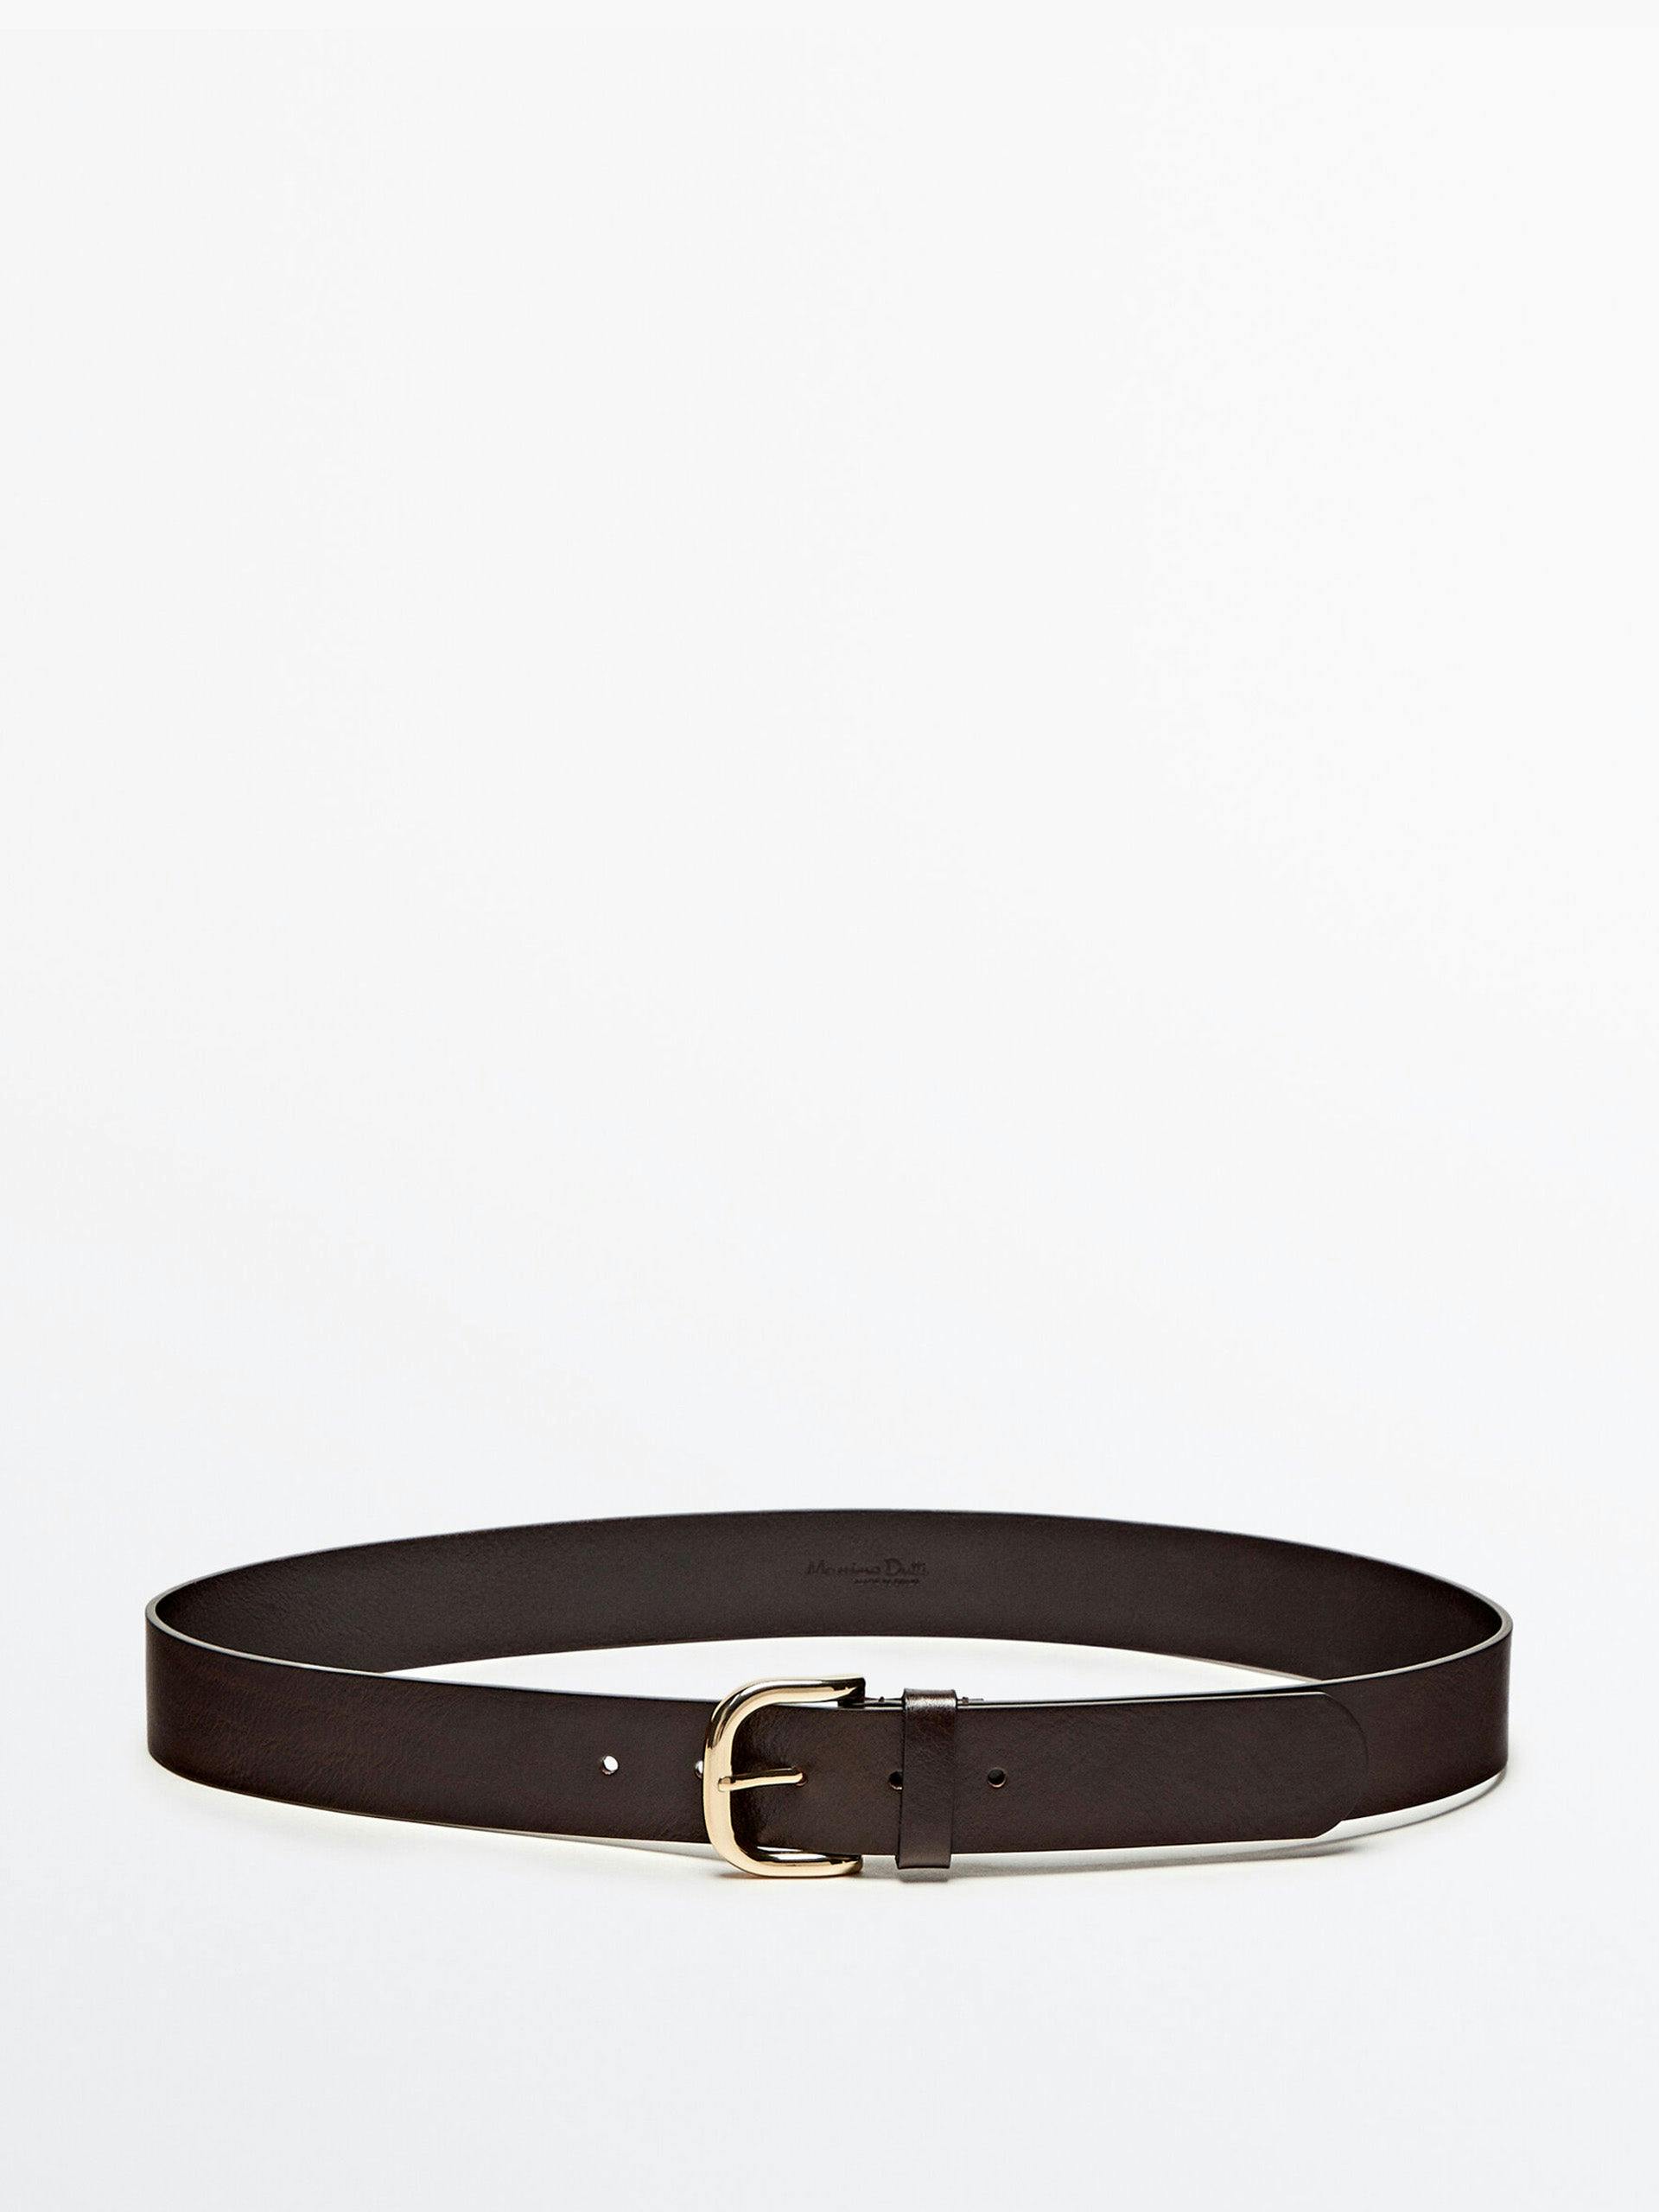 Leather belt with gold toned buckle